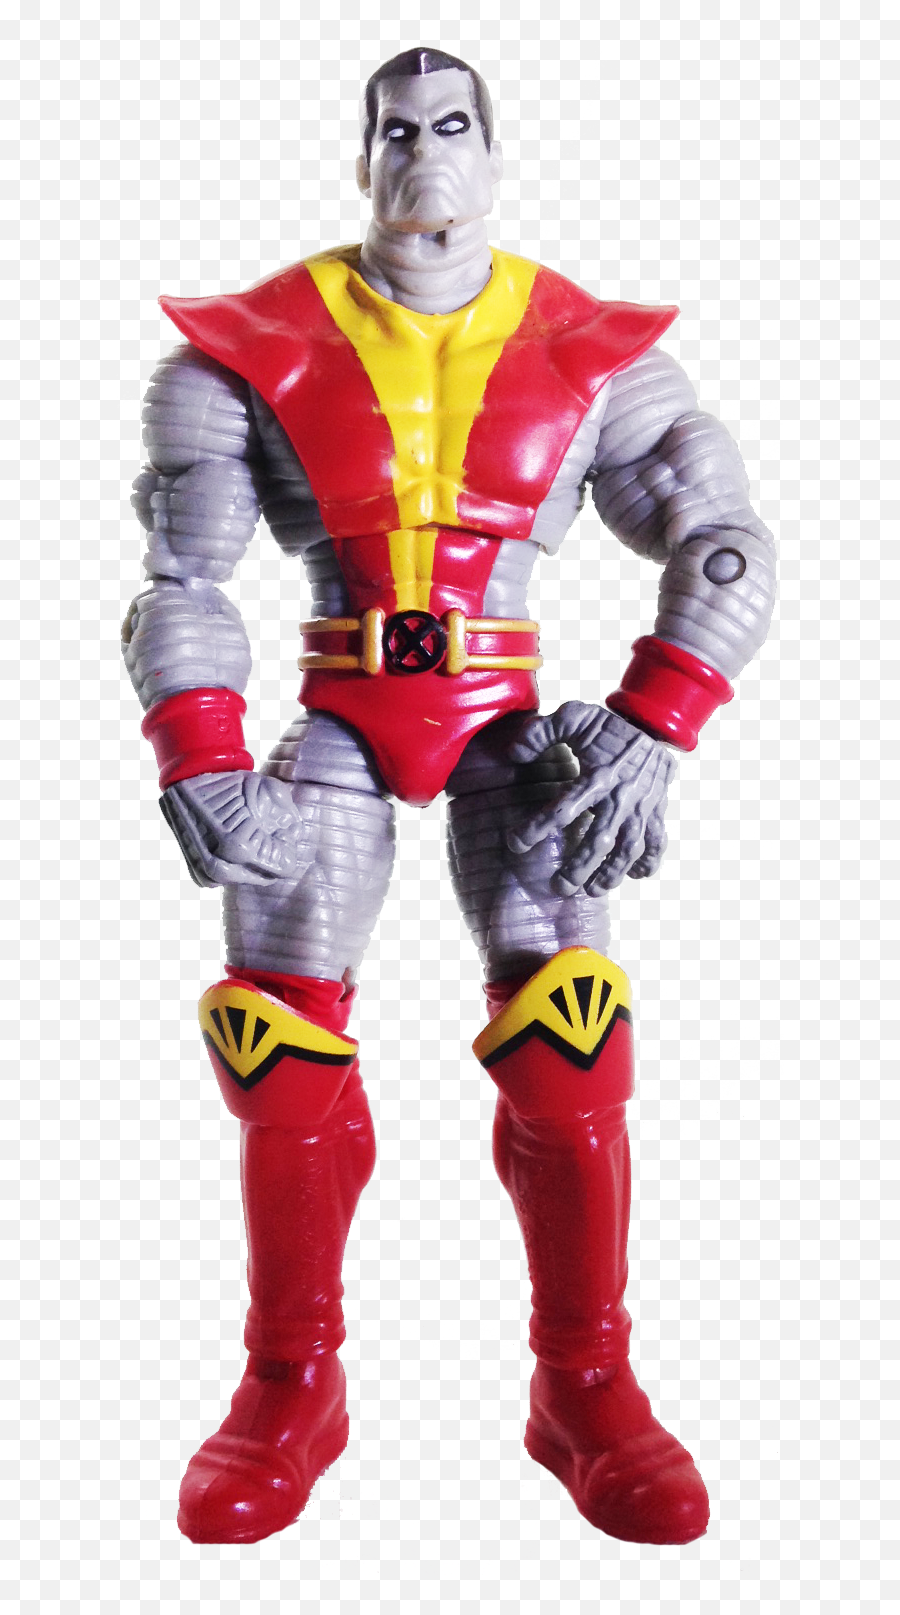 Download Colossus - Action Figure Full Size Png Image Pngkit Superhero,Colossus Png